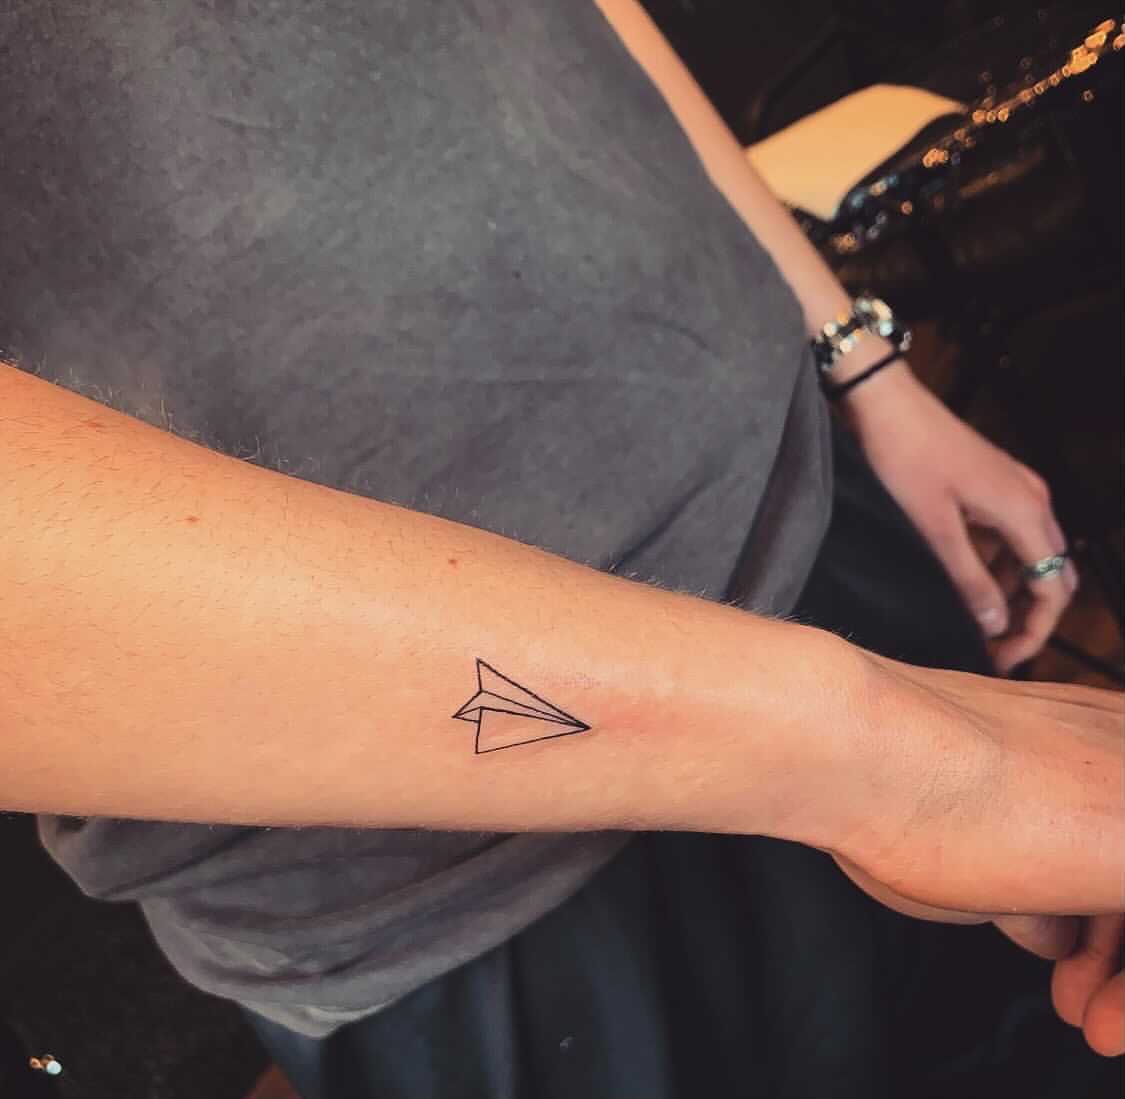 23 Minimalist And Small Tattoo Designs With Meanings